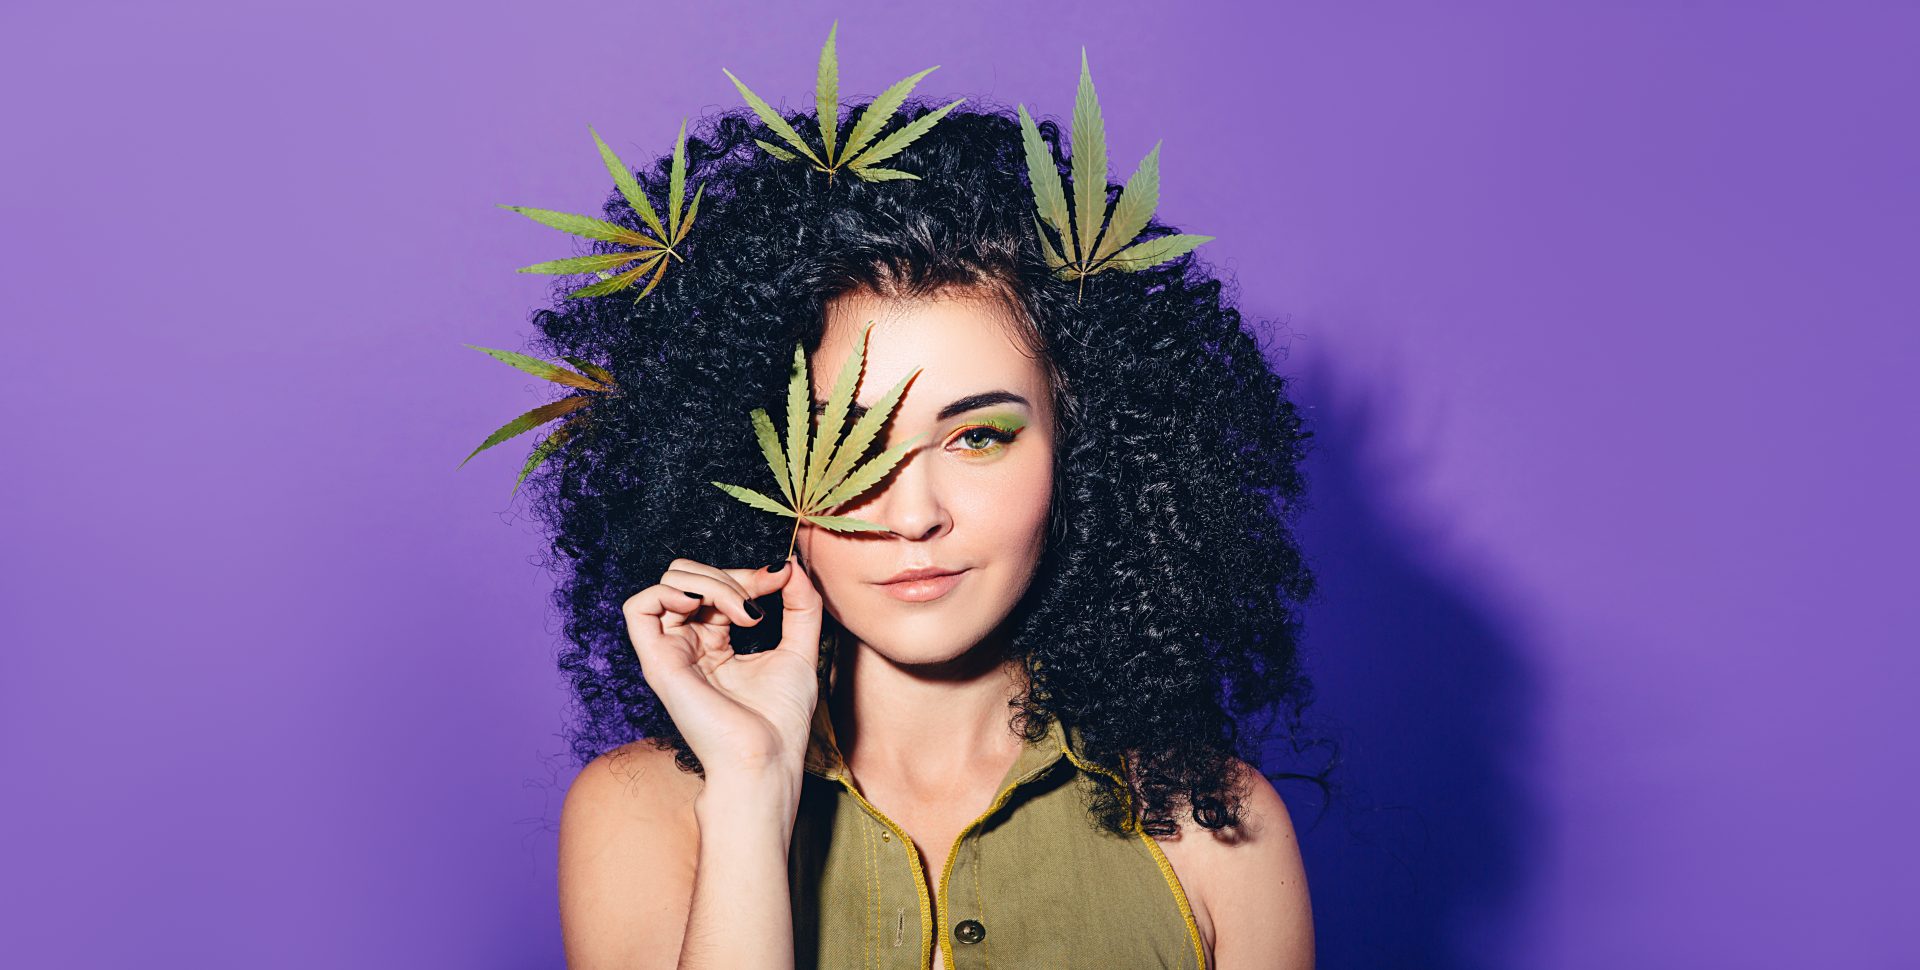 Girl with Cannabis Leaves in her hair, holding a Cannabis leaf up to her eye.